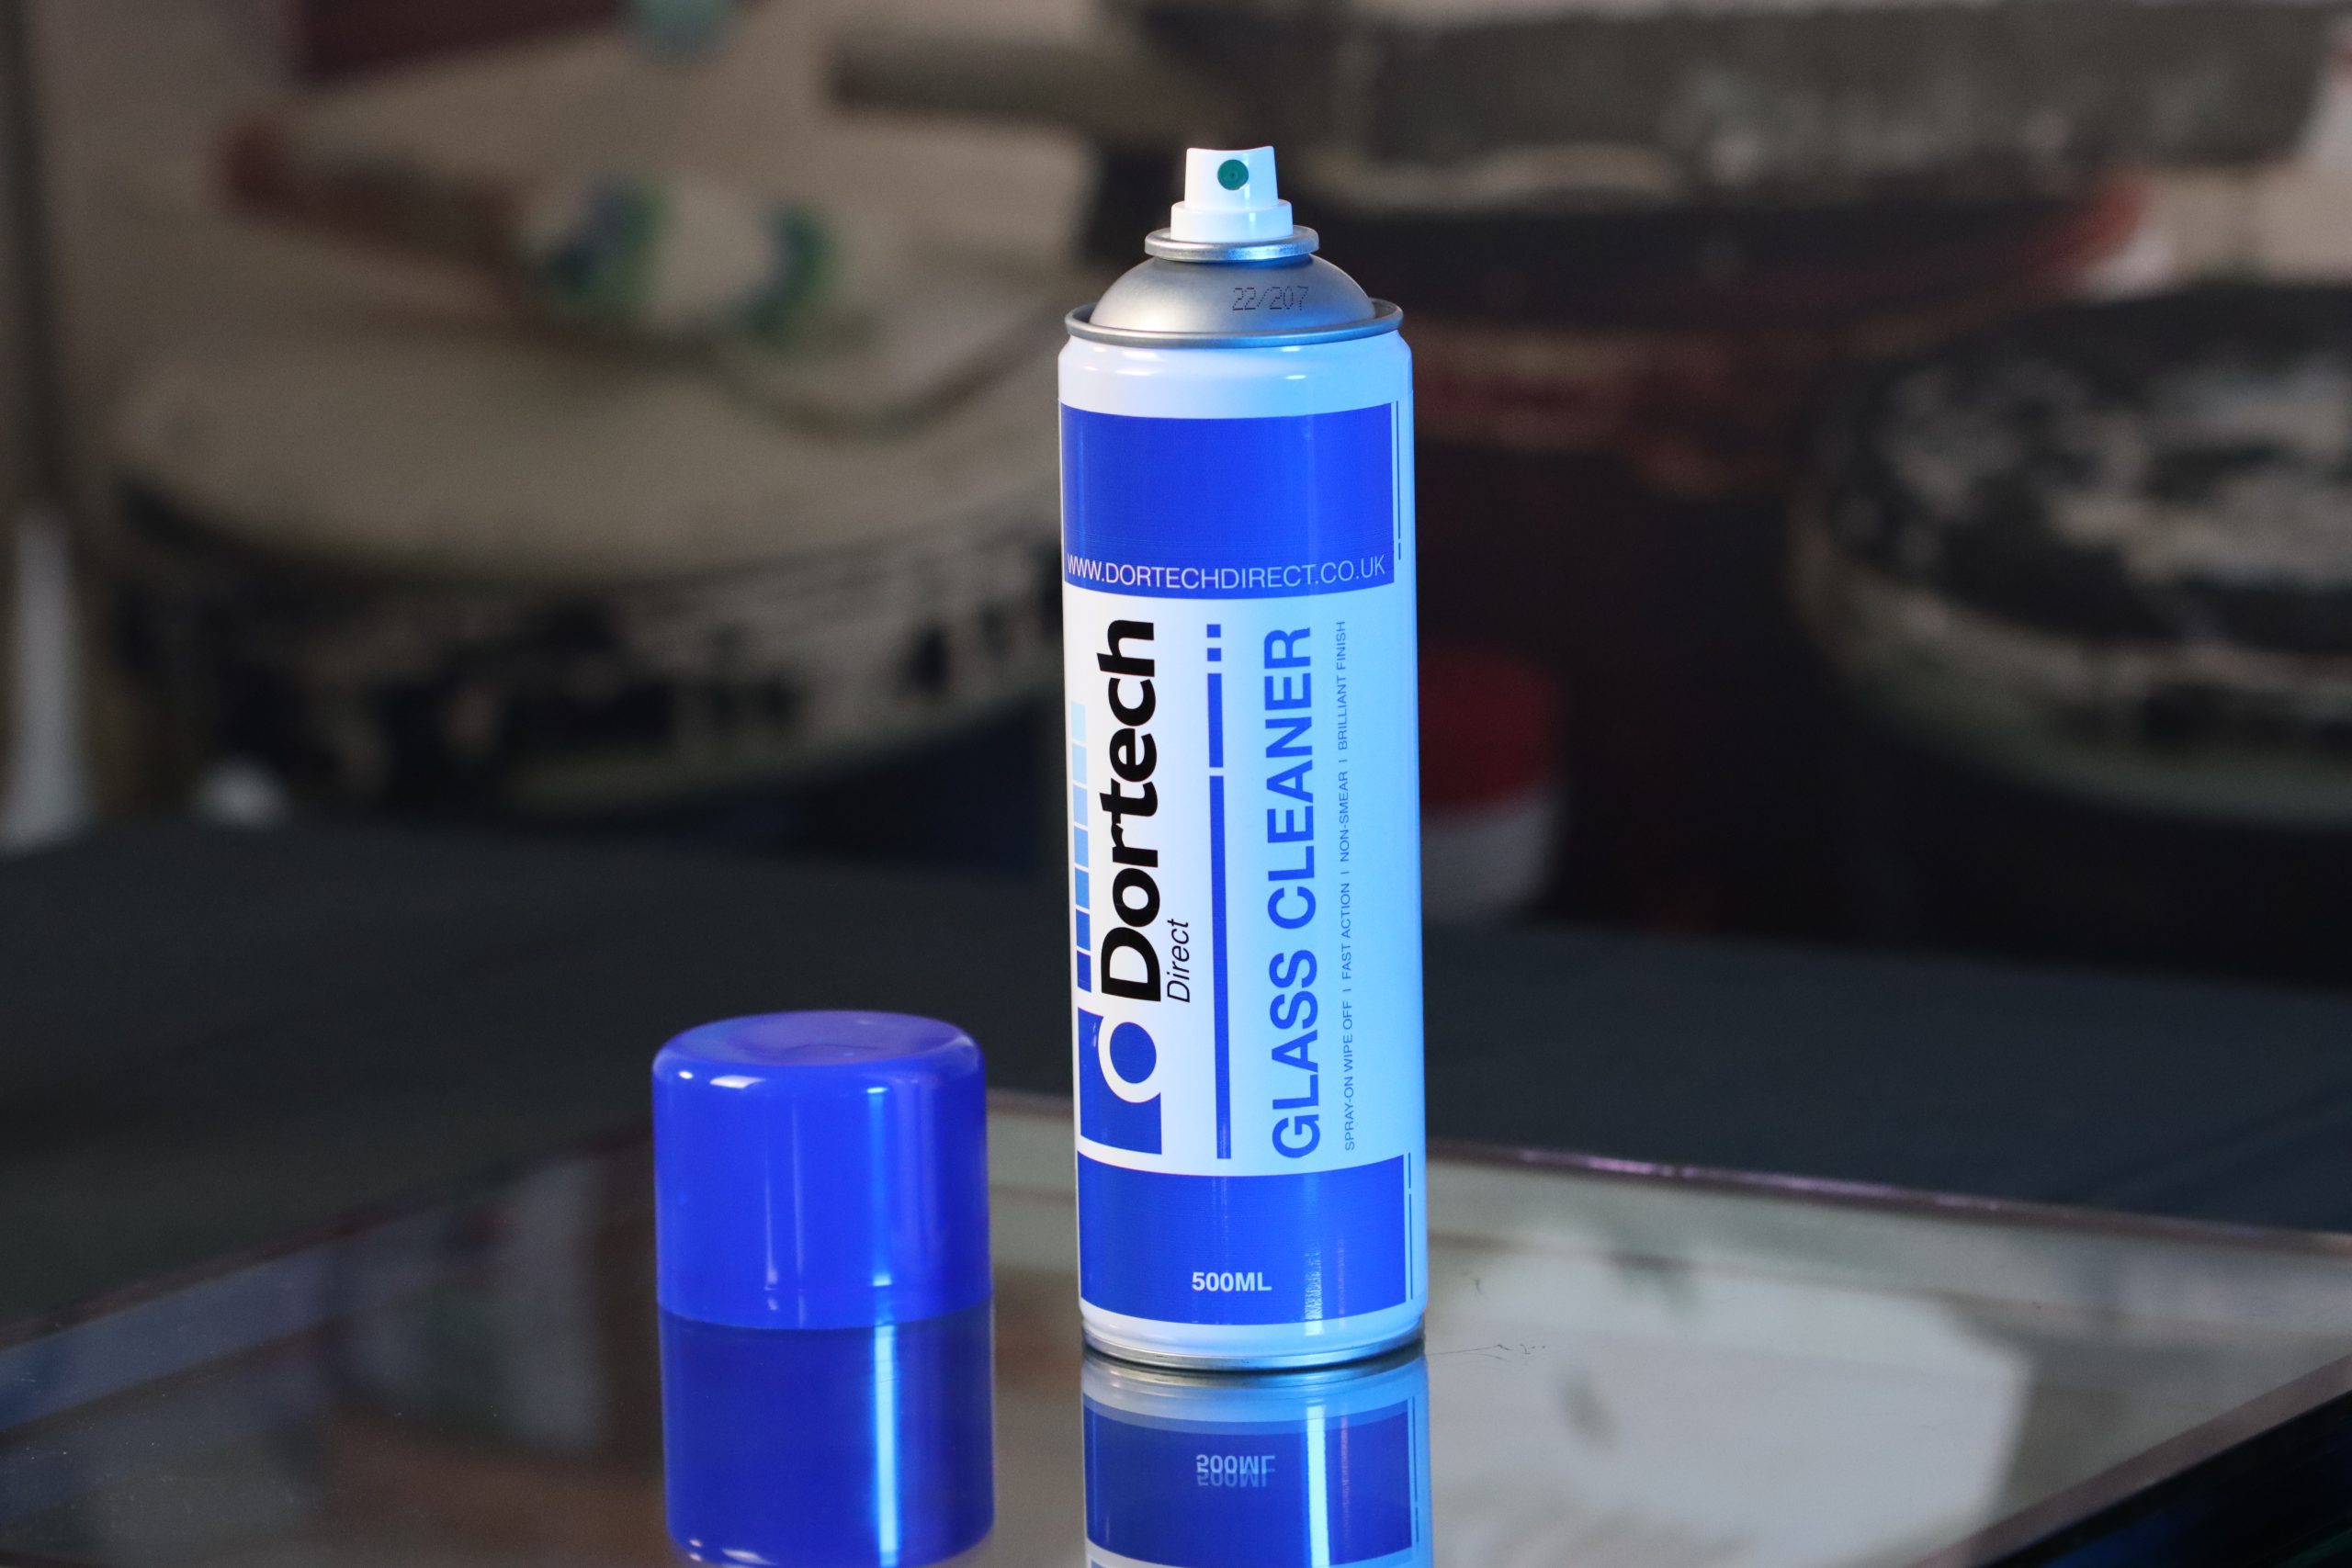 Why you need Dortech Directs Glass Cleaner